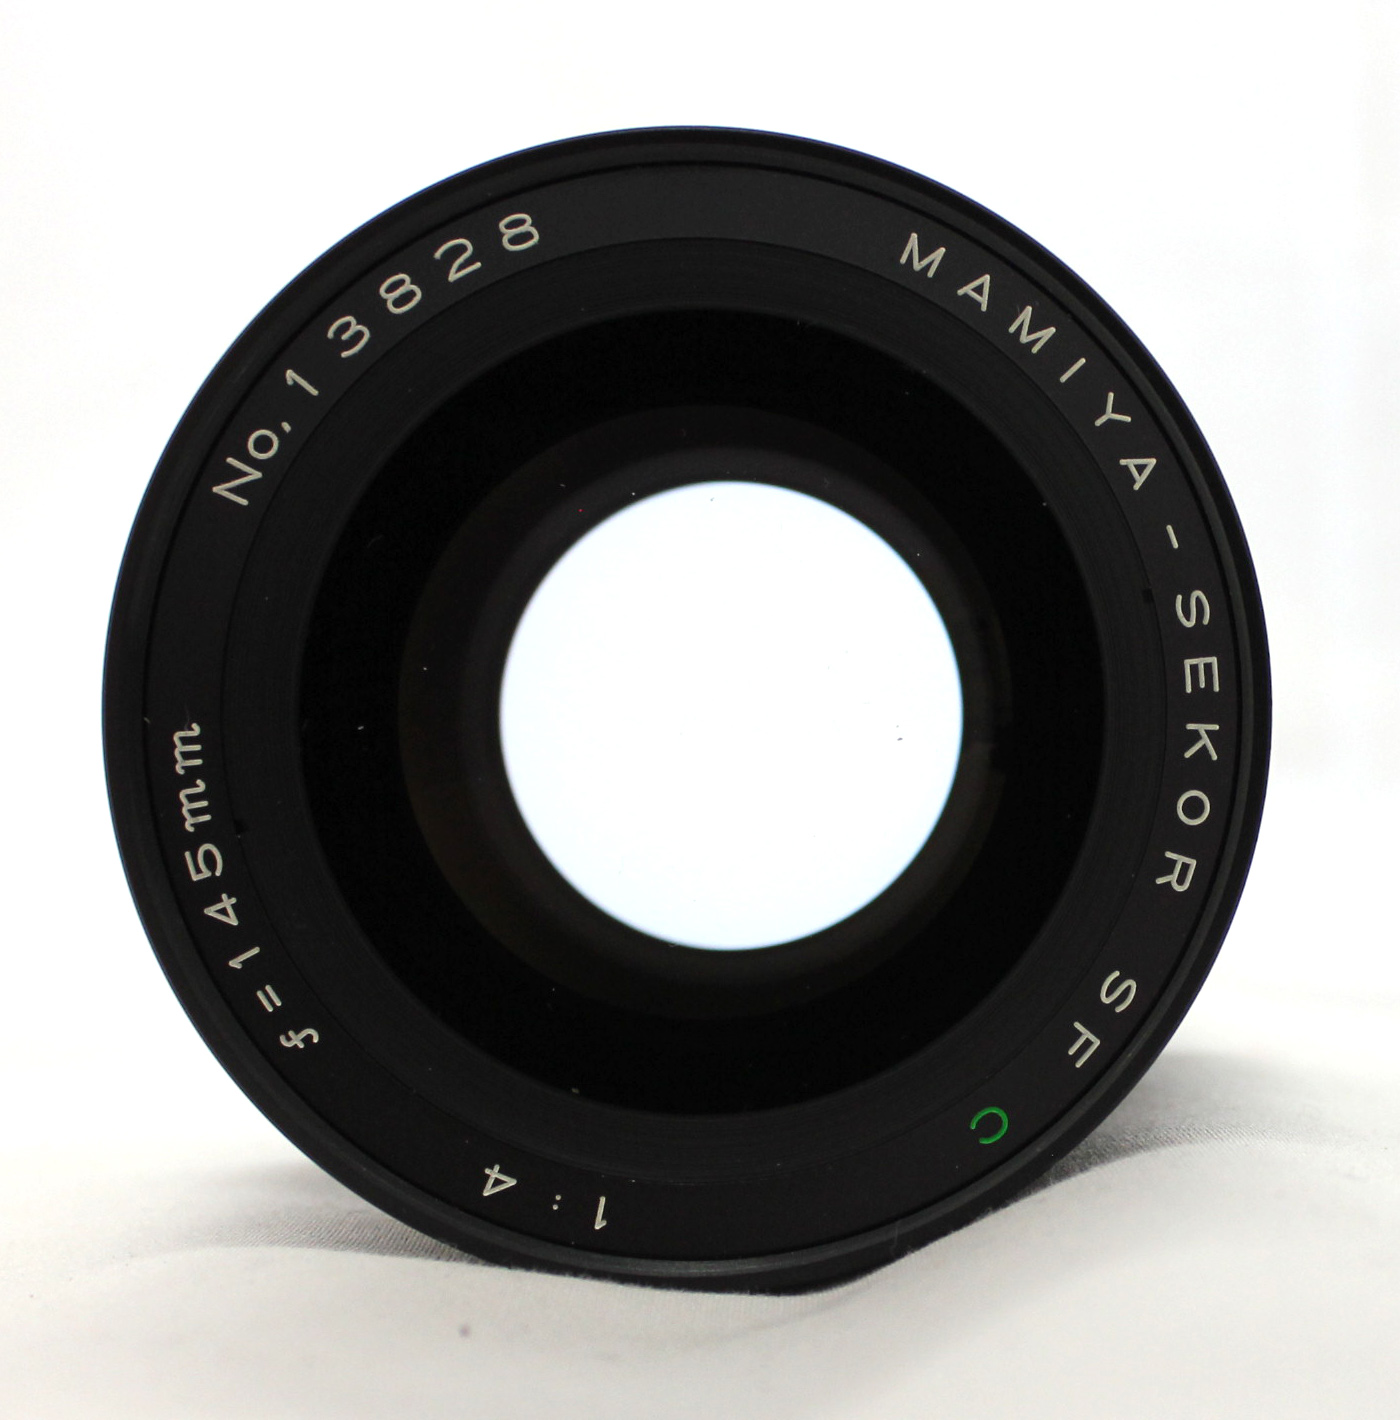  Mamiya Sekor C SF 145mm F/4 for M645 Pro 1000S Super TL from Japan Photo 6